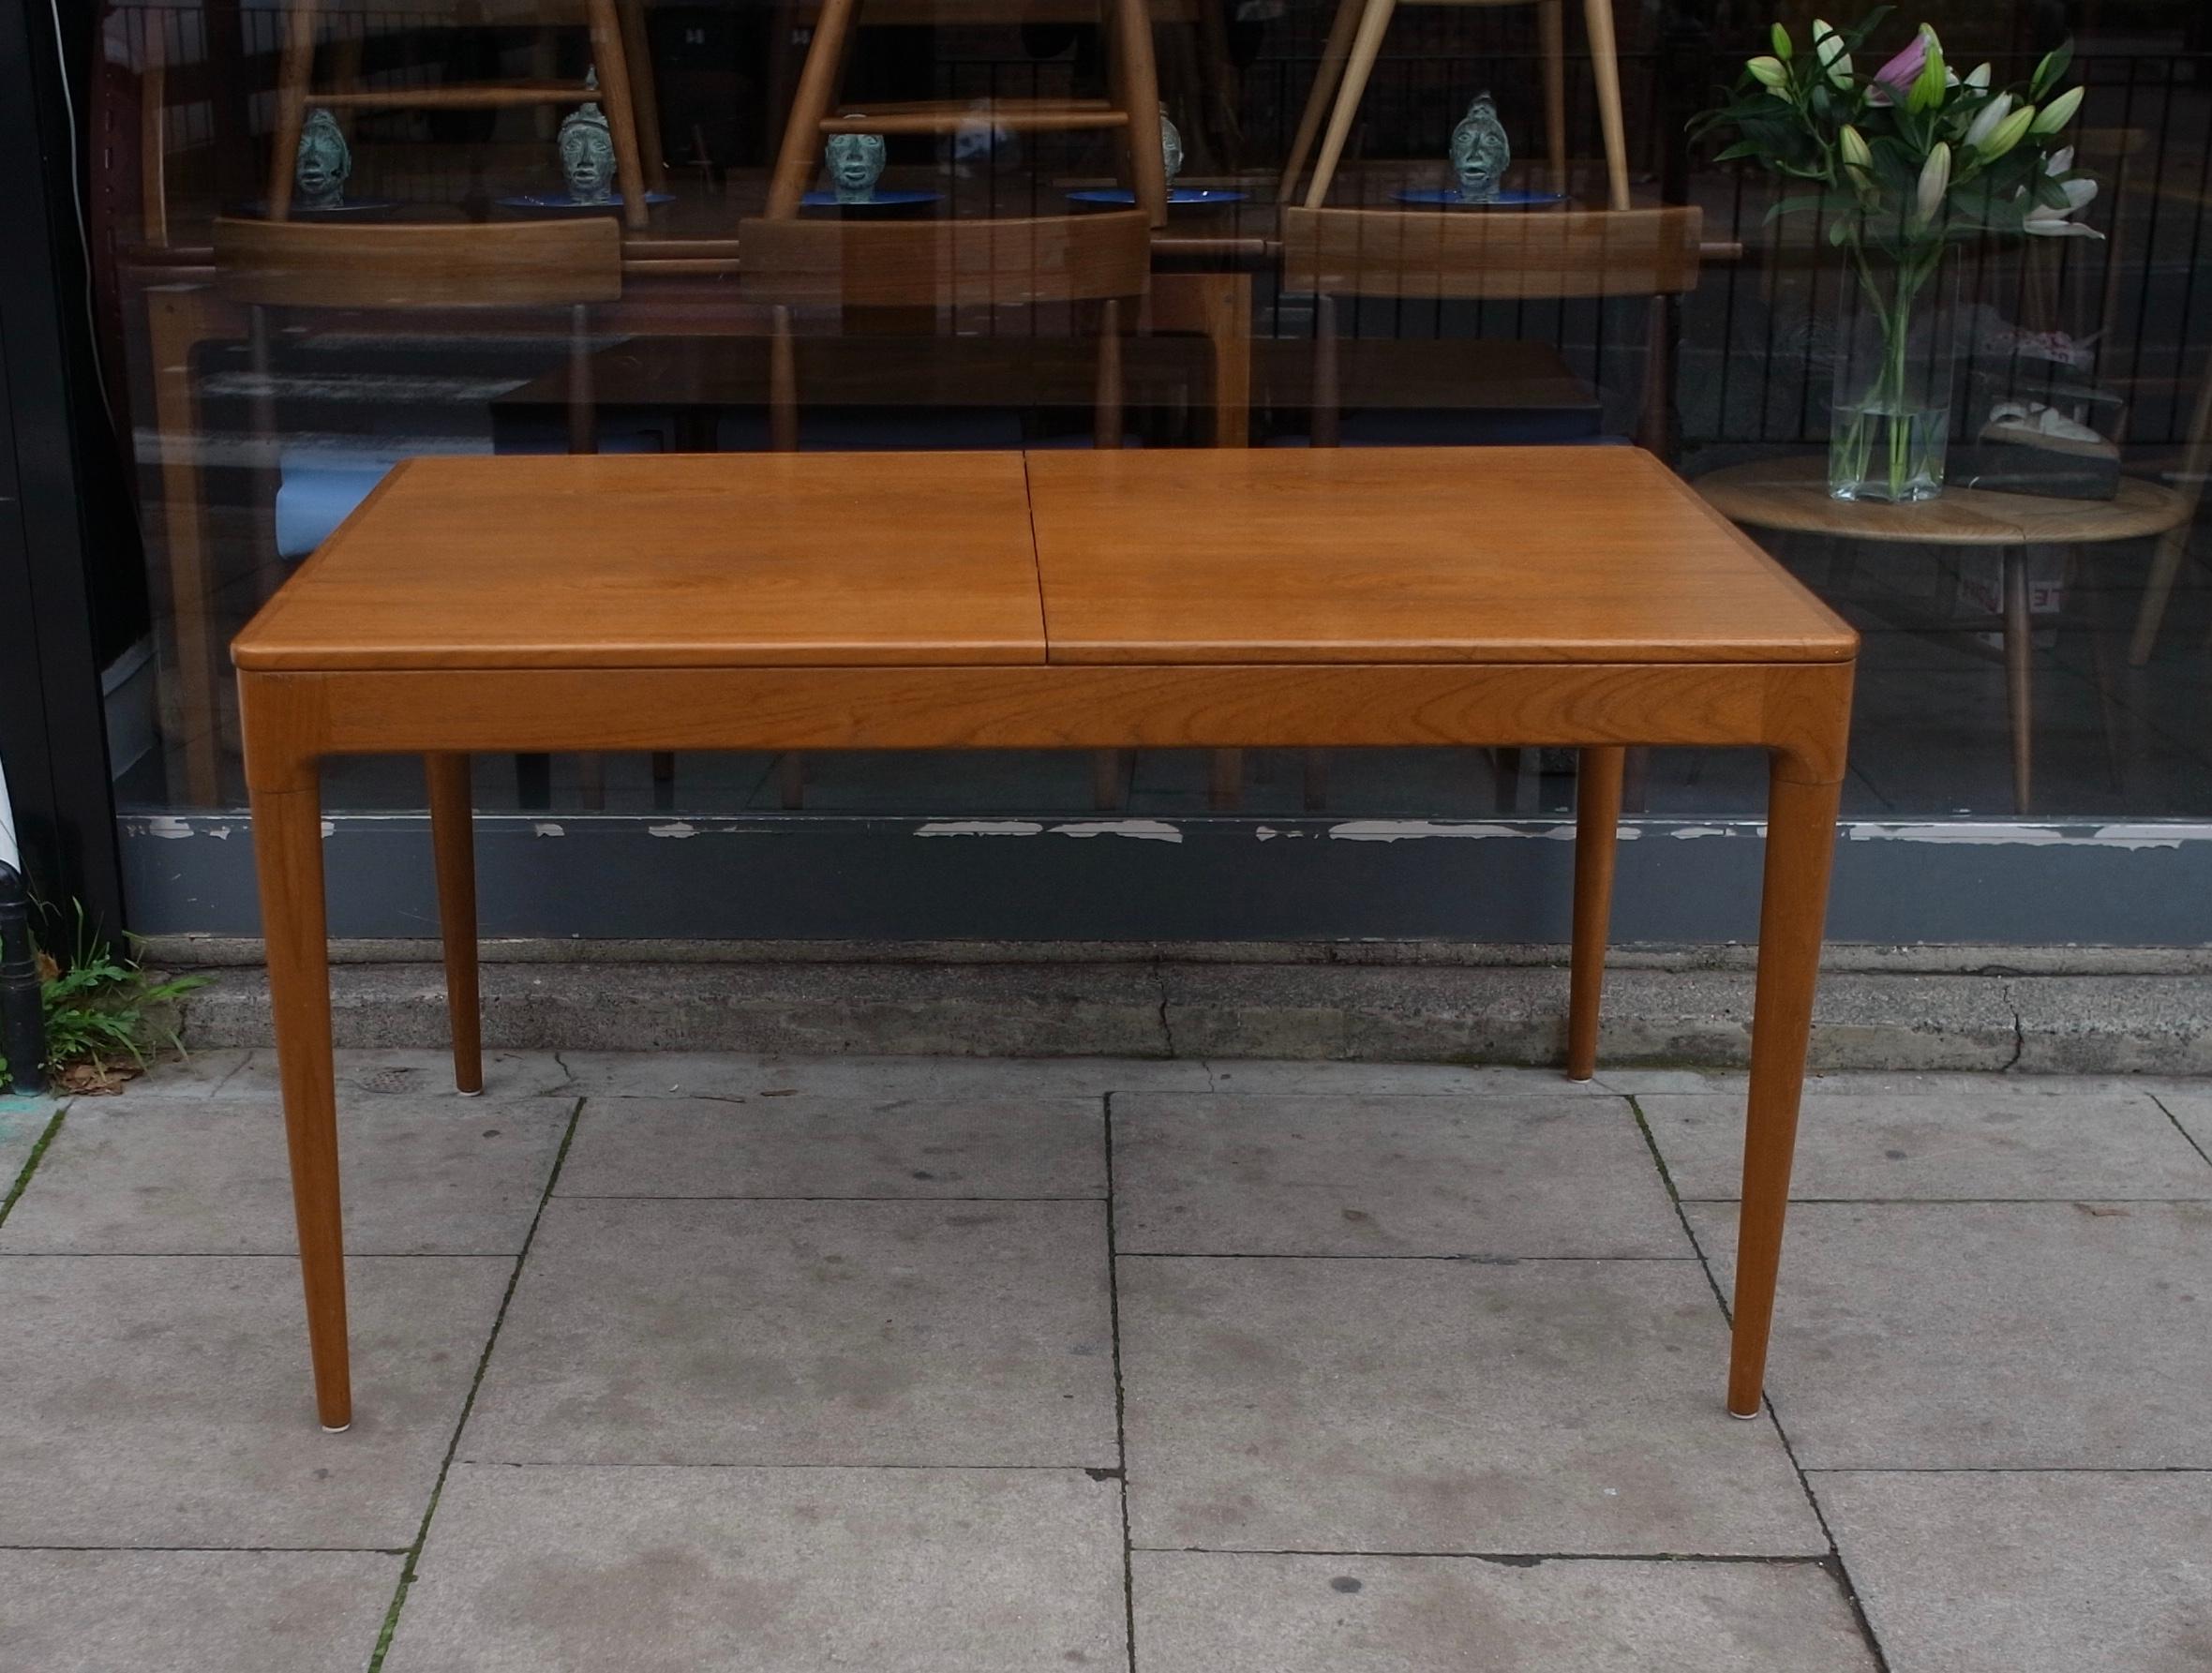 A fine sculptural 1960s teak Danish rectangular extending dining table set on four tapered solid teak legs, designed by Arne Hovmand-Olsen and produced by Mogens Kold. This table is able to seat 6x people unextended and upto 10x people when fully